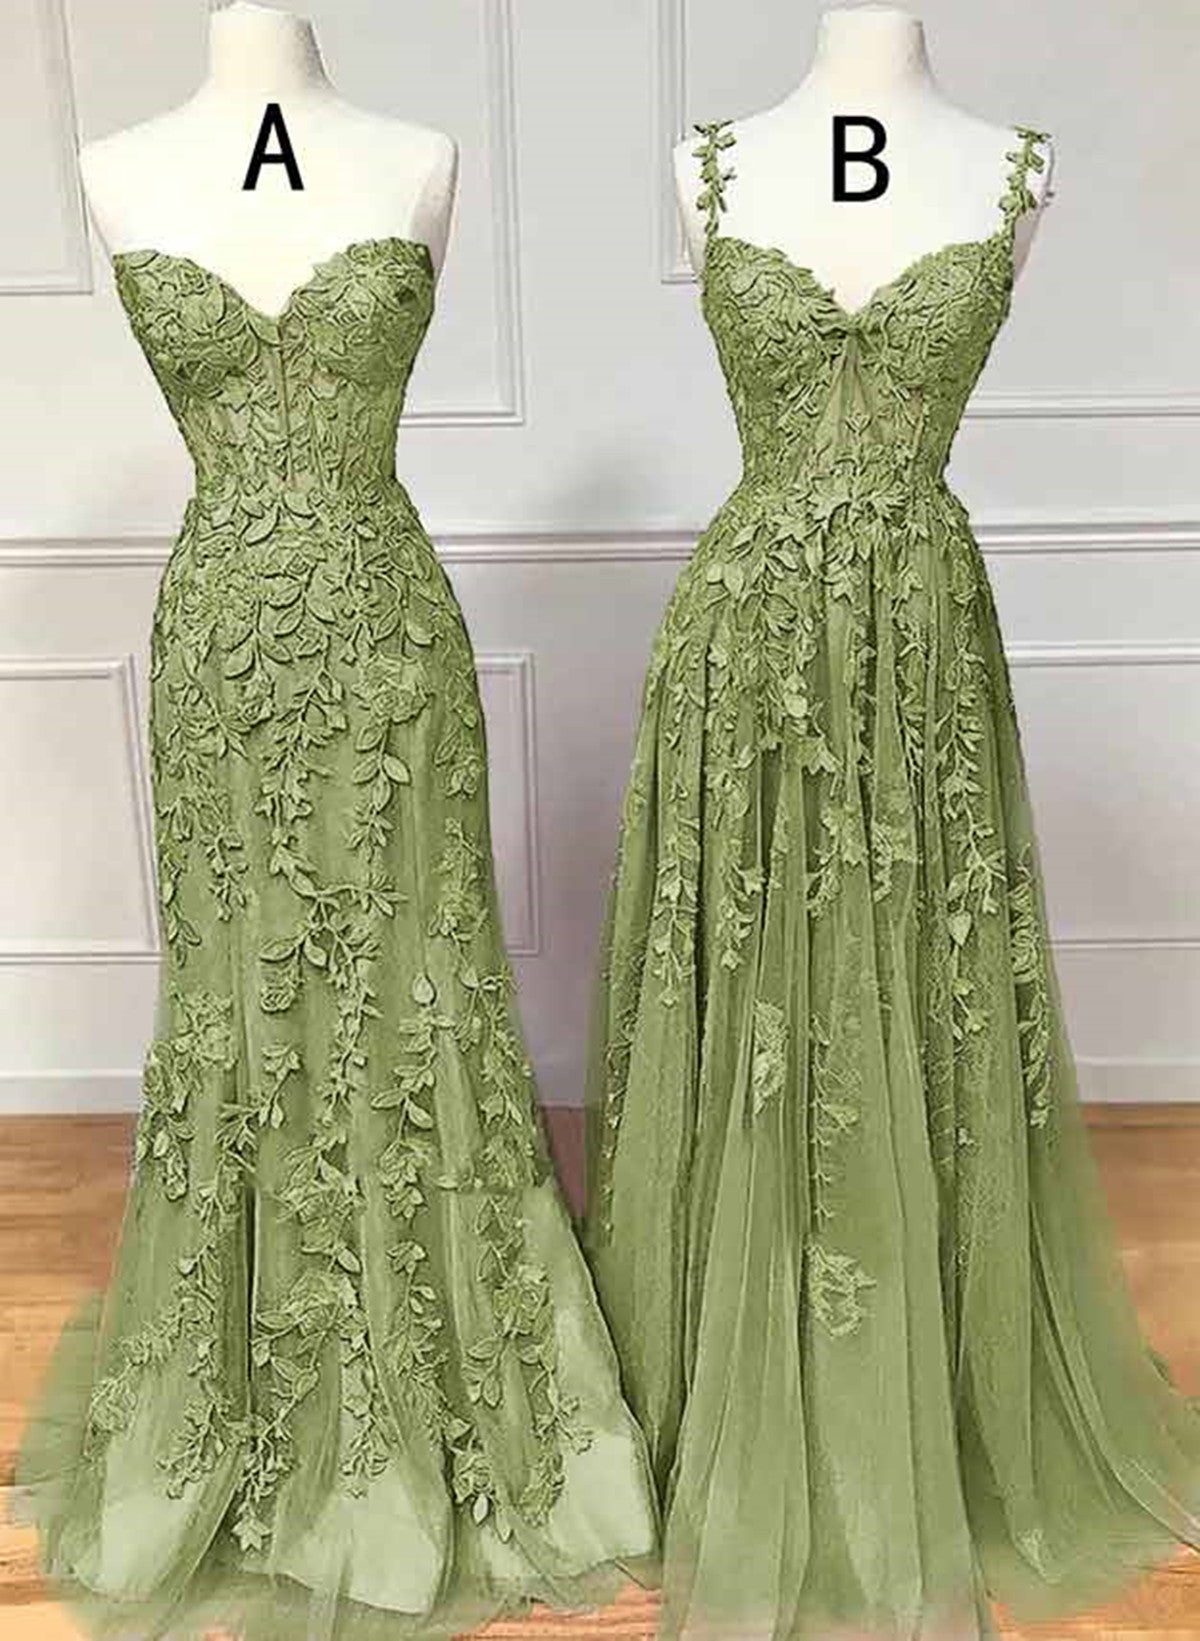 Lovely Sage Green Tulle With Lace Long Formal Dress Outfits For Girls, Sweetheart Prom Dress